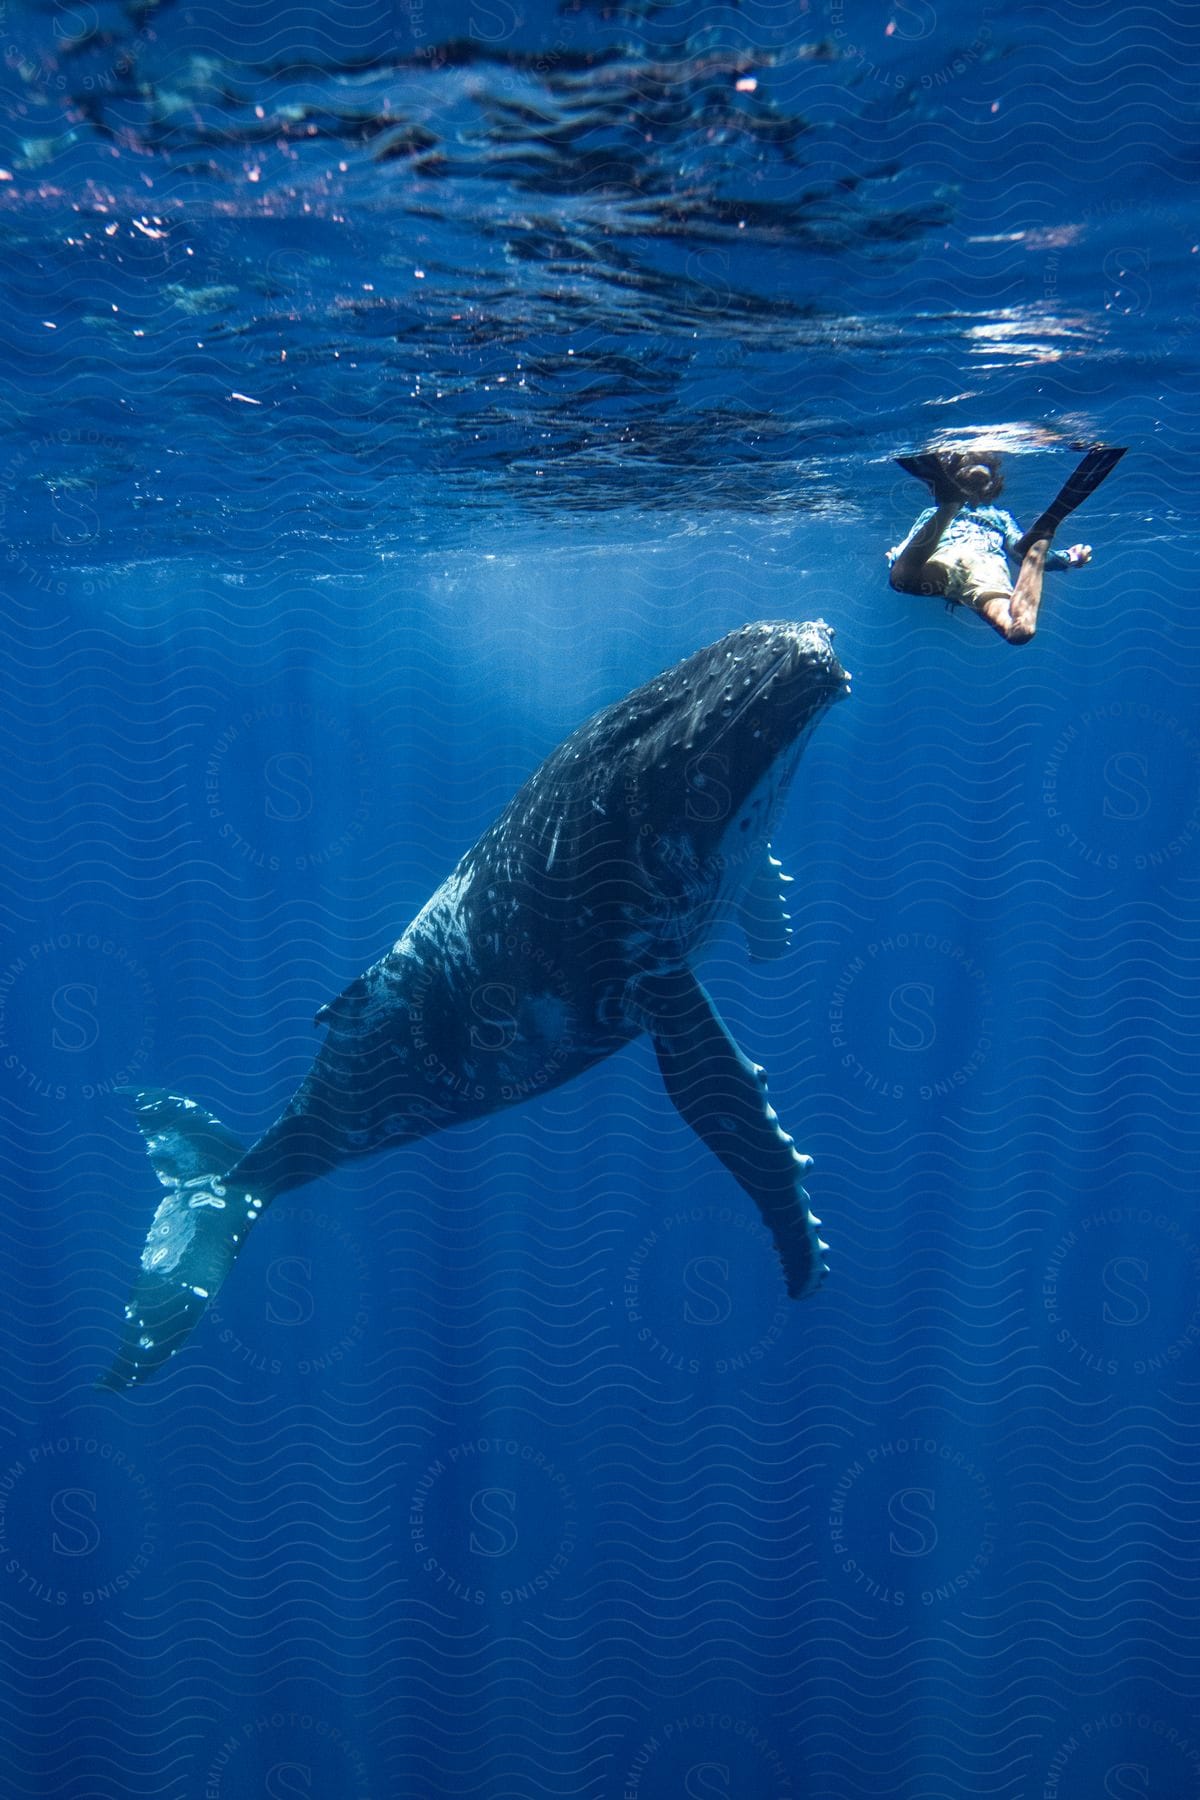 Humpback whale next to a diver and the sun's reflection coloring the blue sea